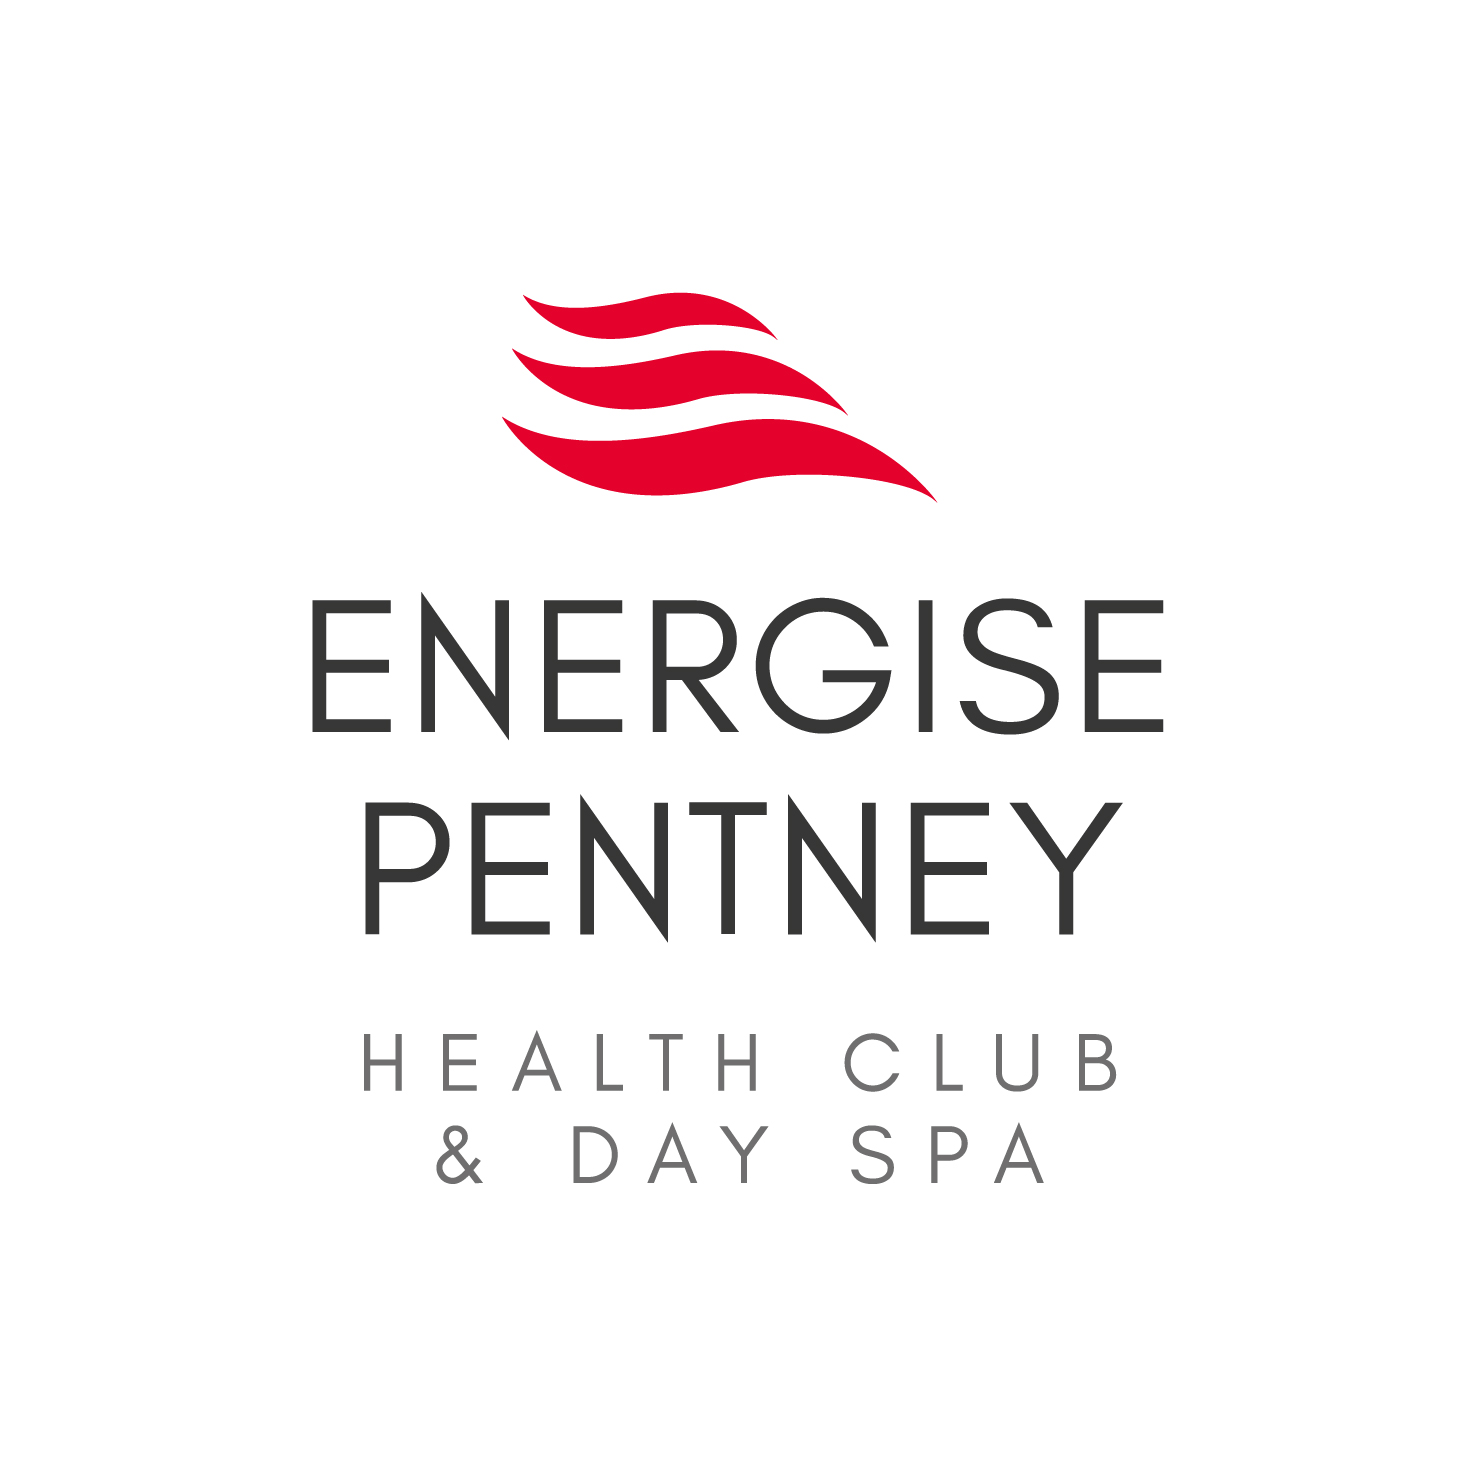 Energise Pentney Health Club and Day Spa